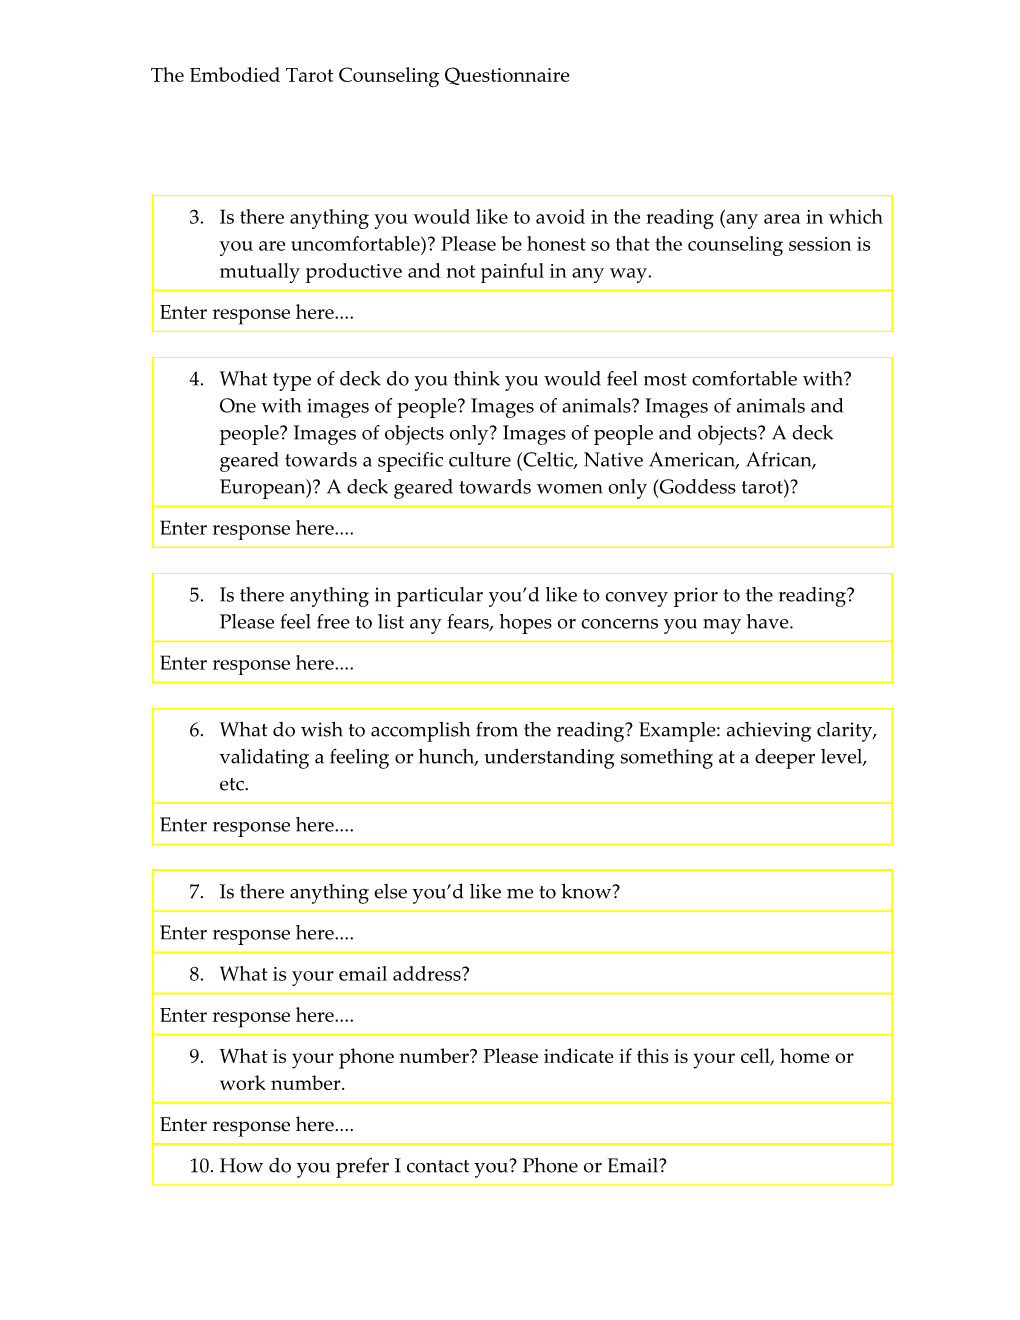 The Embodied Tarot Counseling Questionnaire